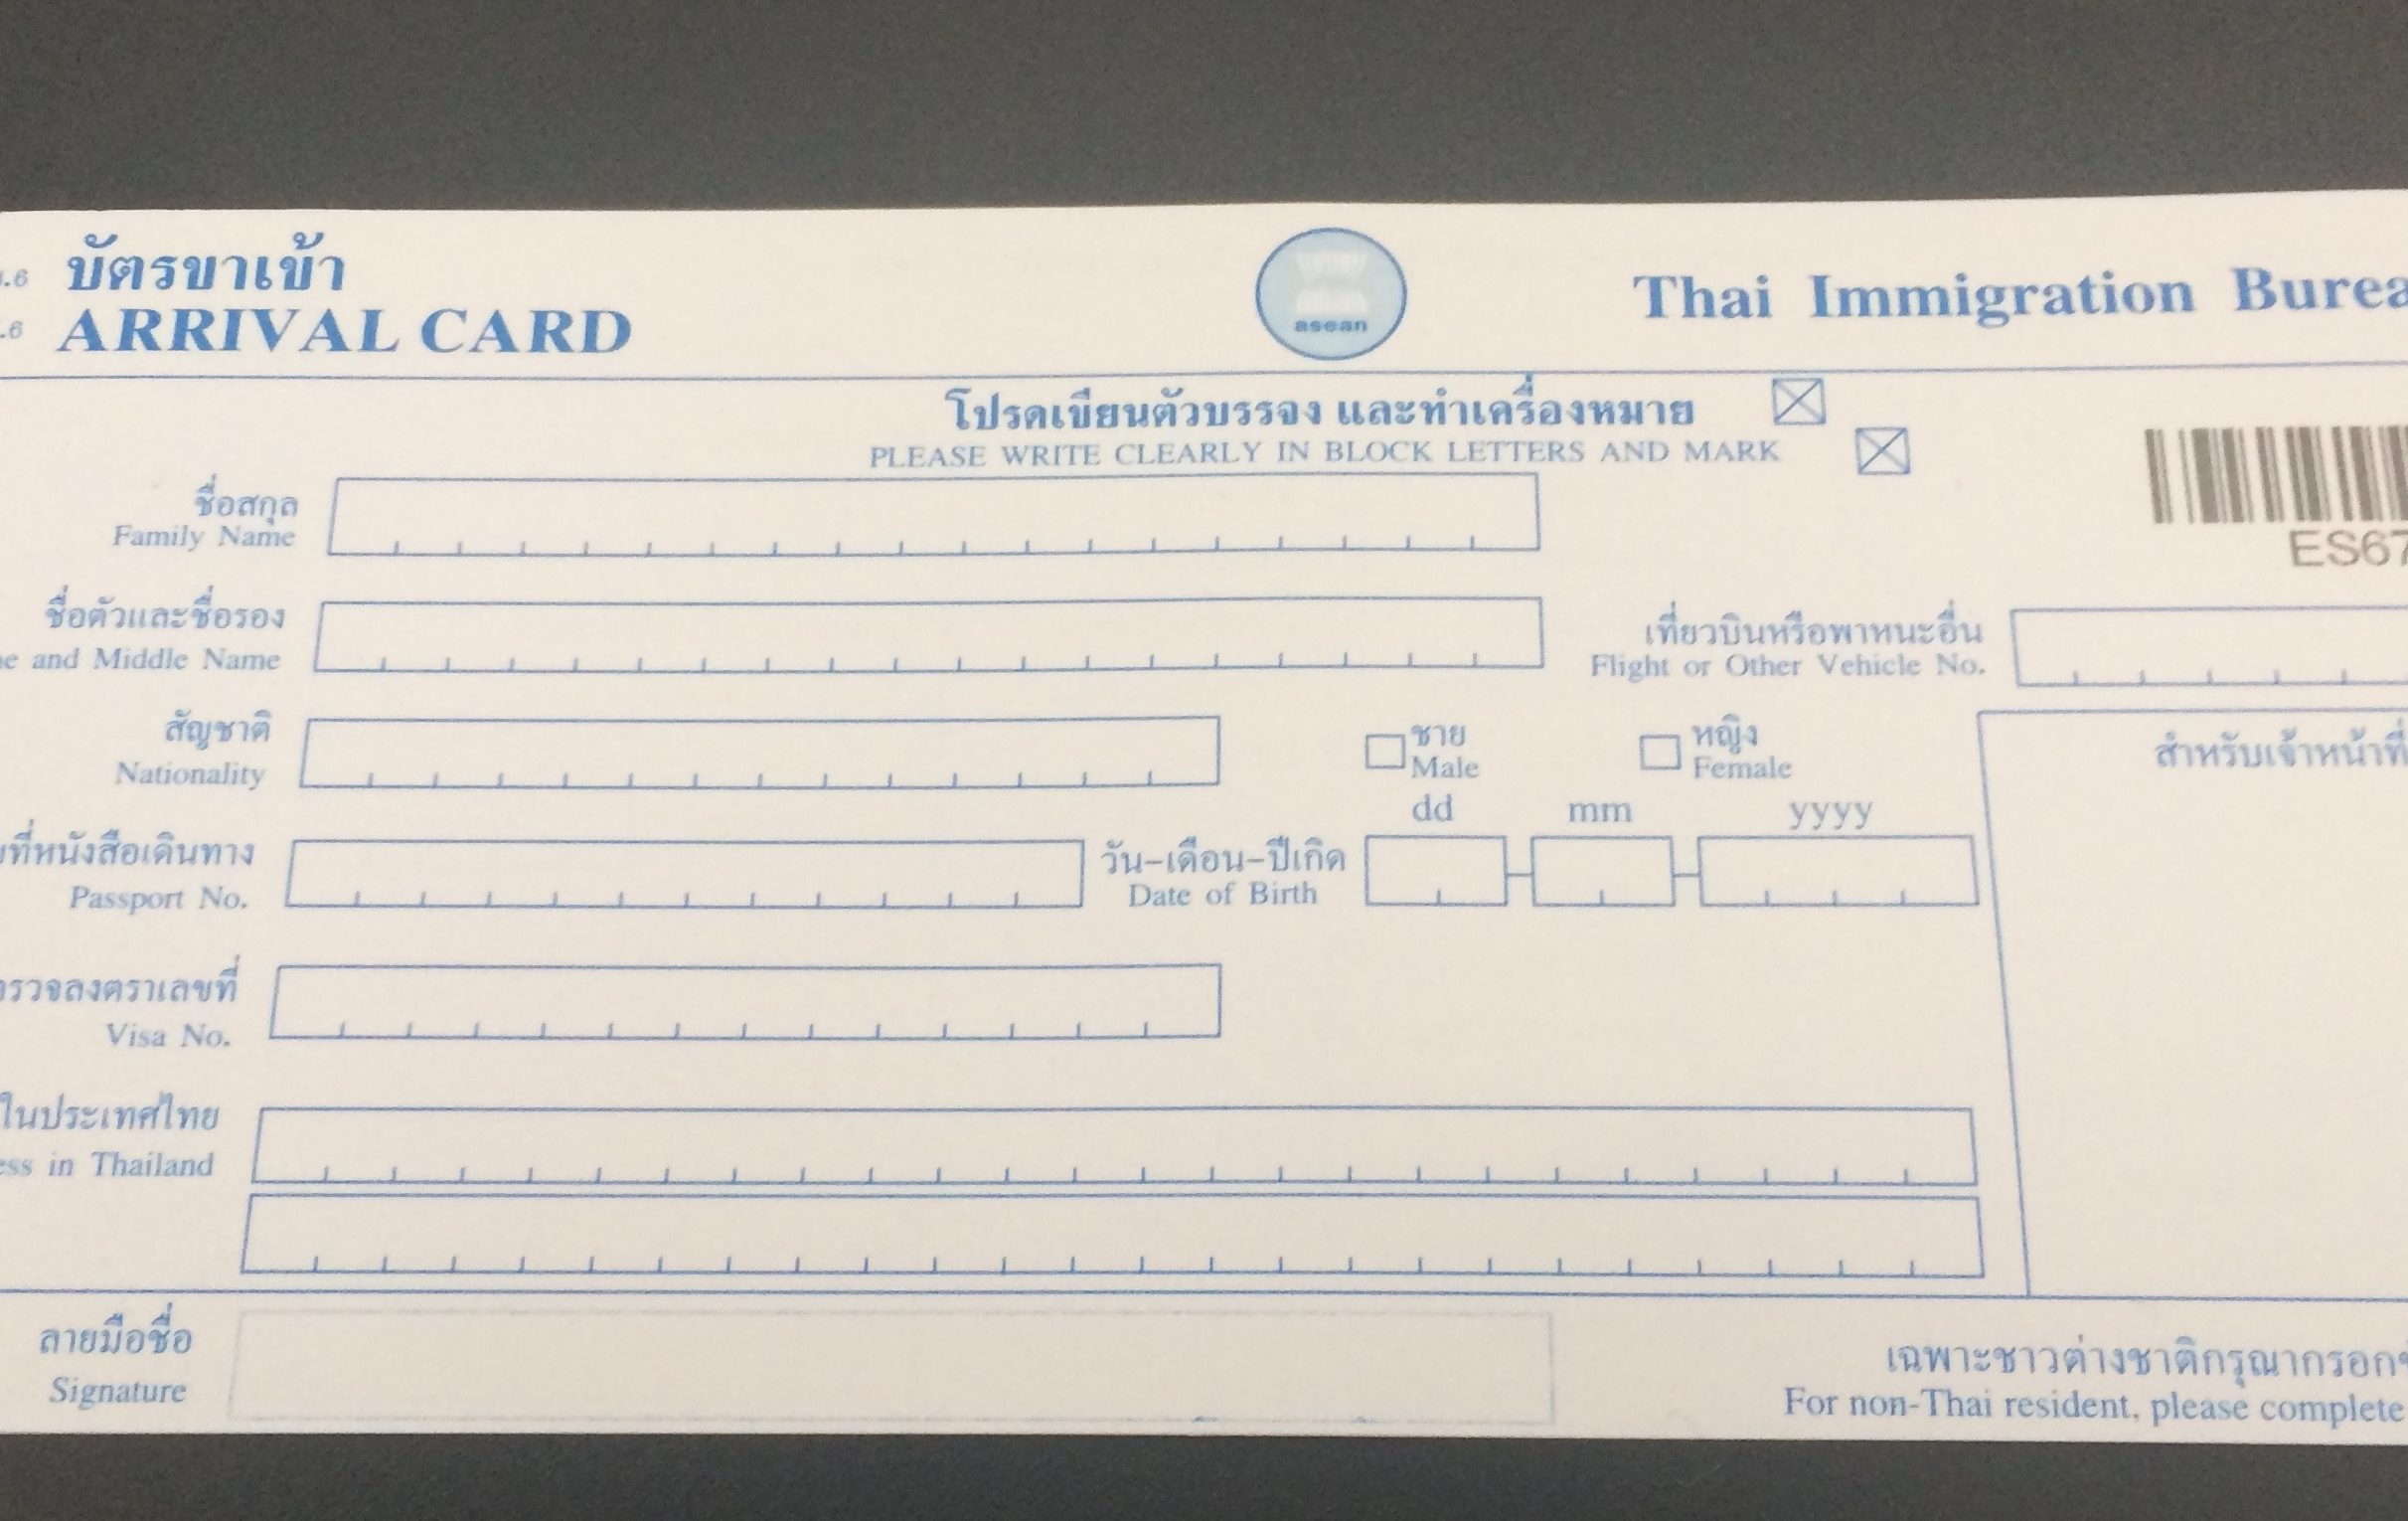 a white card with blue writing